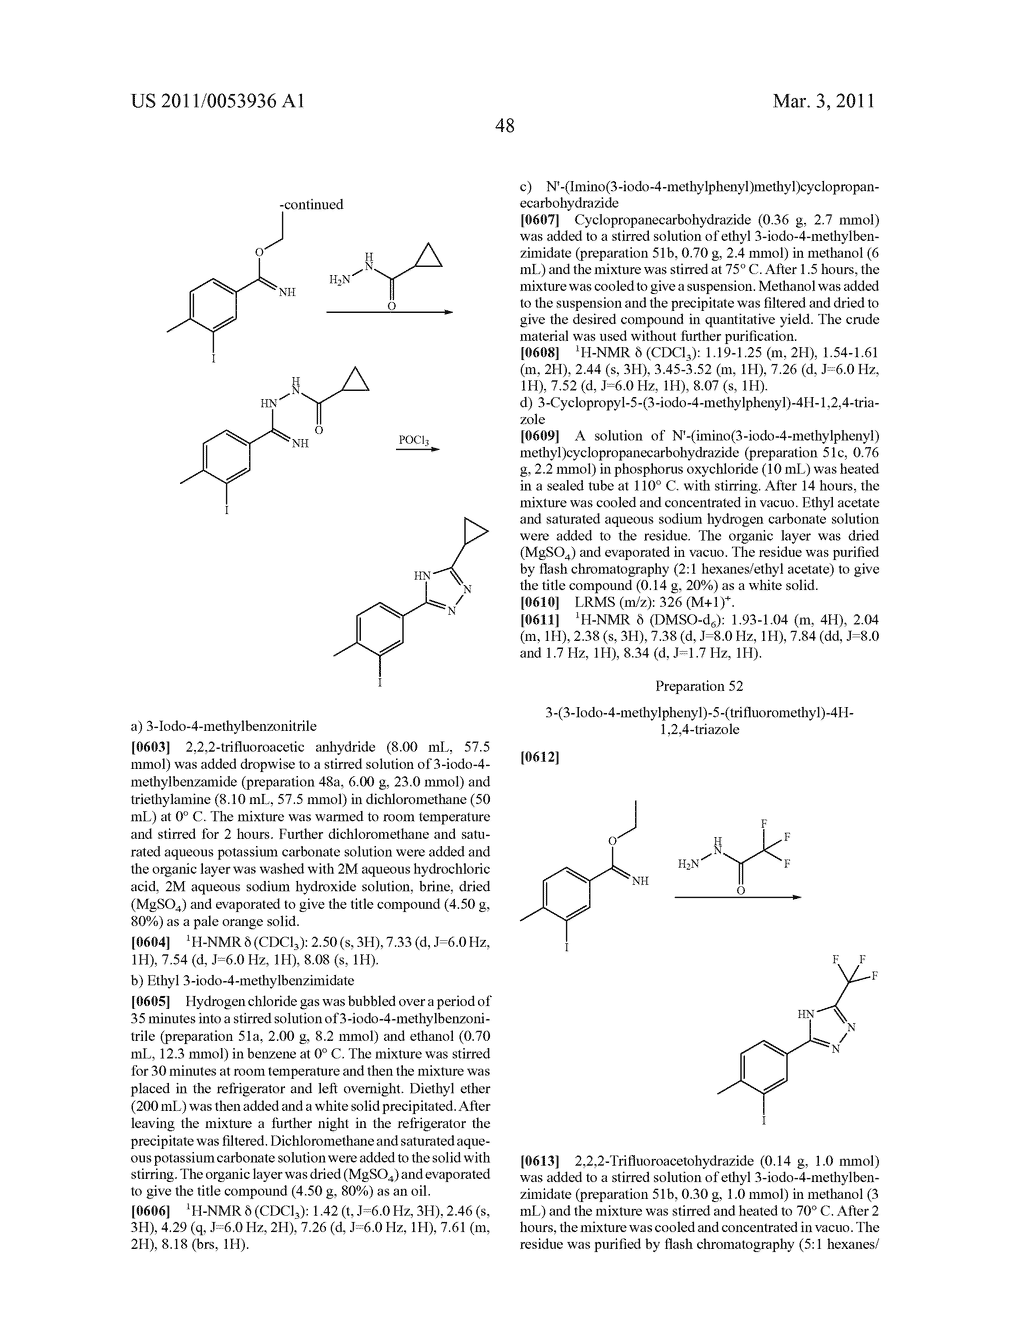  SUBSTITUTED SPIRO[CYCLOALKYL-1,3'-INDOL]-2'(1'H)-ONE DERIVATIVES AND THEIR USE AS P38 MITOGEN-ACTIVATED KINASE INHIBITORS - diagram, schematic, and image 49